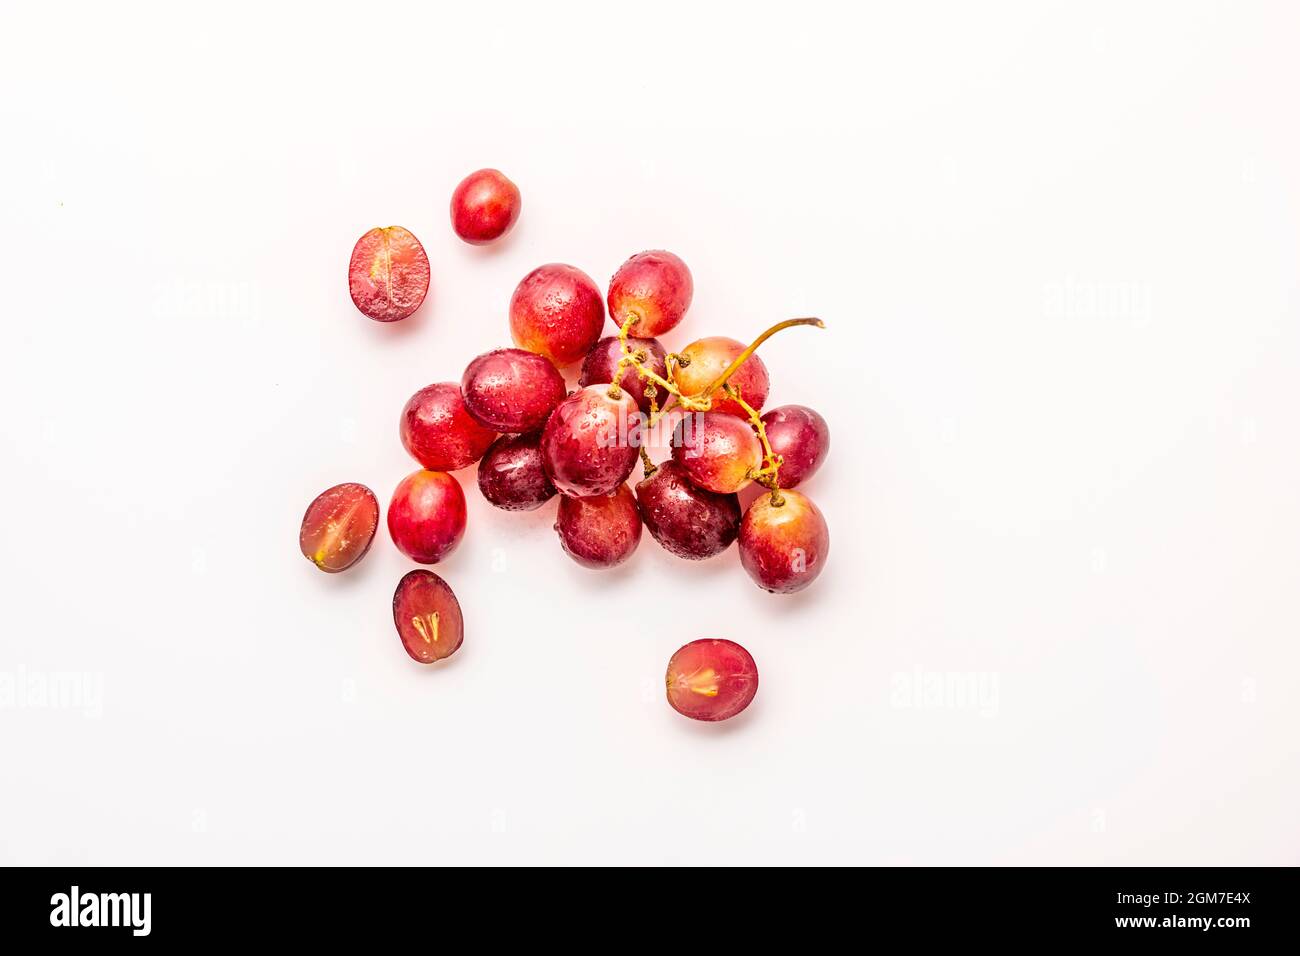 Small bunch of ripe dessert grapes on white background, some split in half Stock Photo